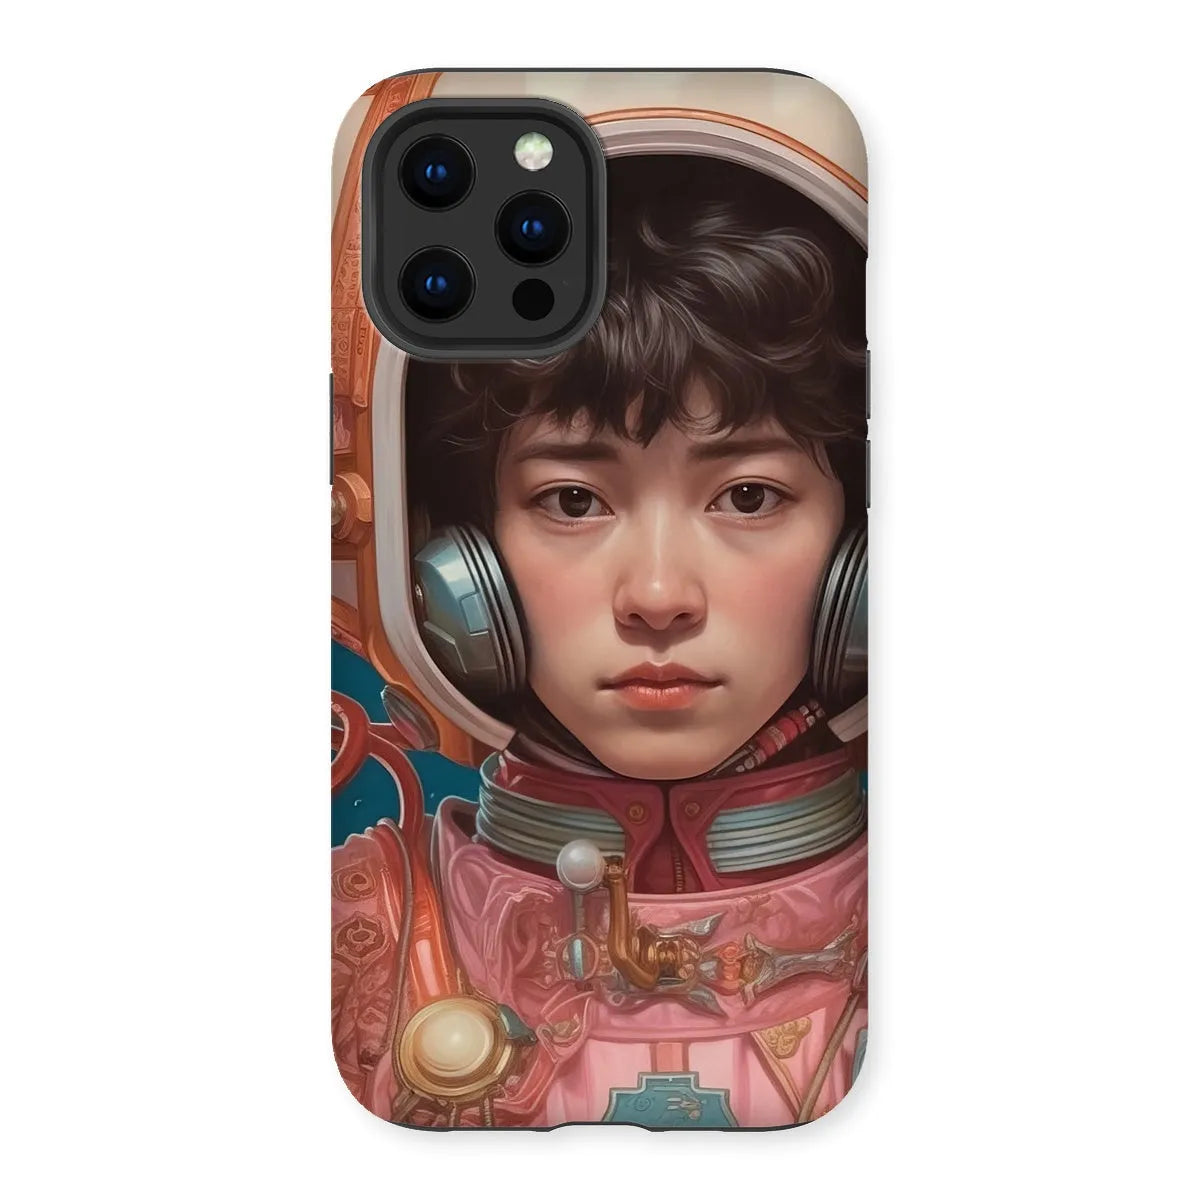 Kaito The Gay Astronaut - Lgbtq Art Phone Case - Iphone 12 Pro Max / Matte - Mobile Phone Cases - Aesthetic Art